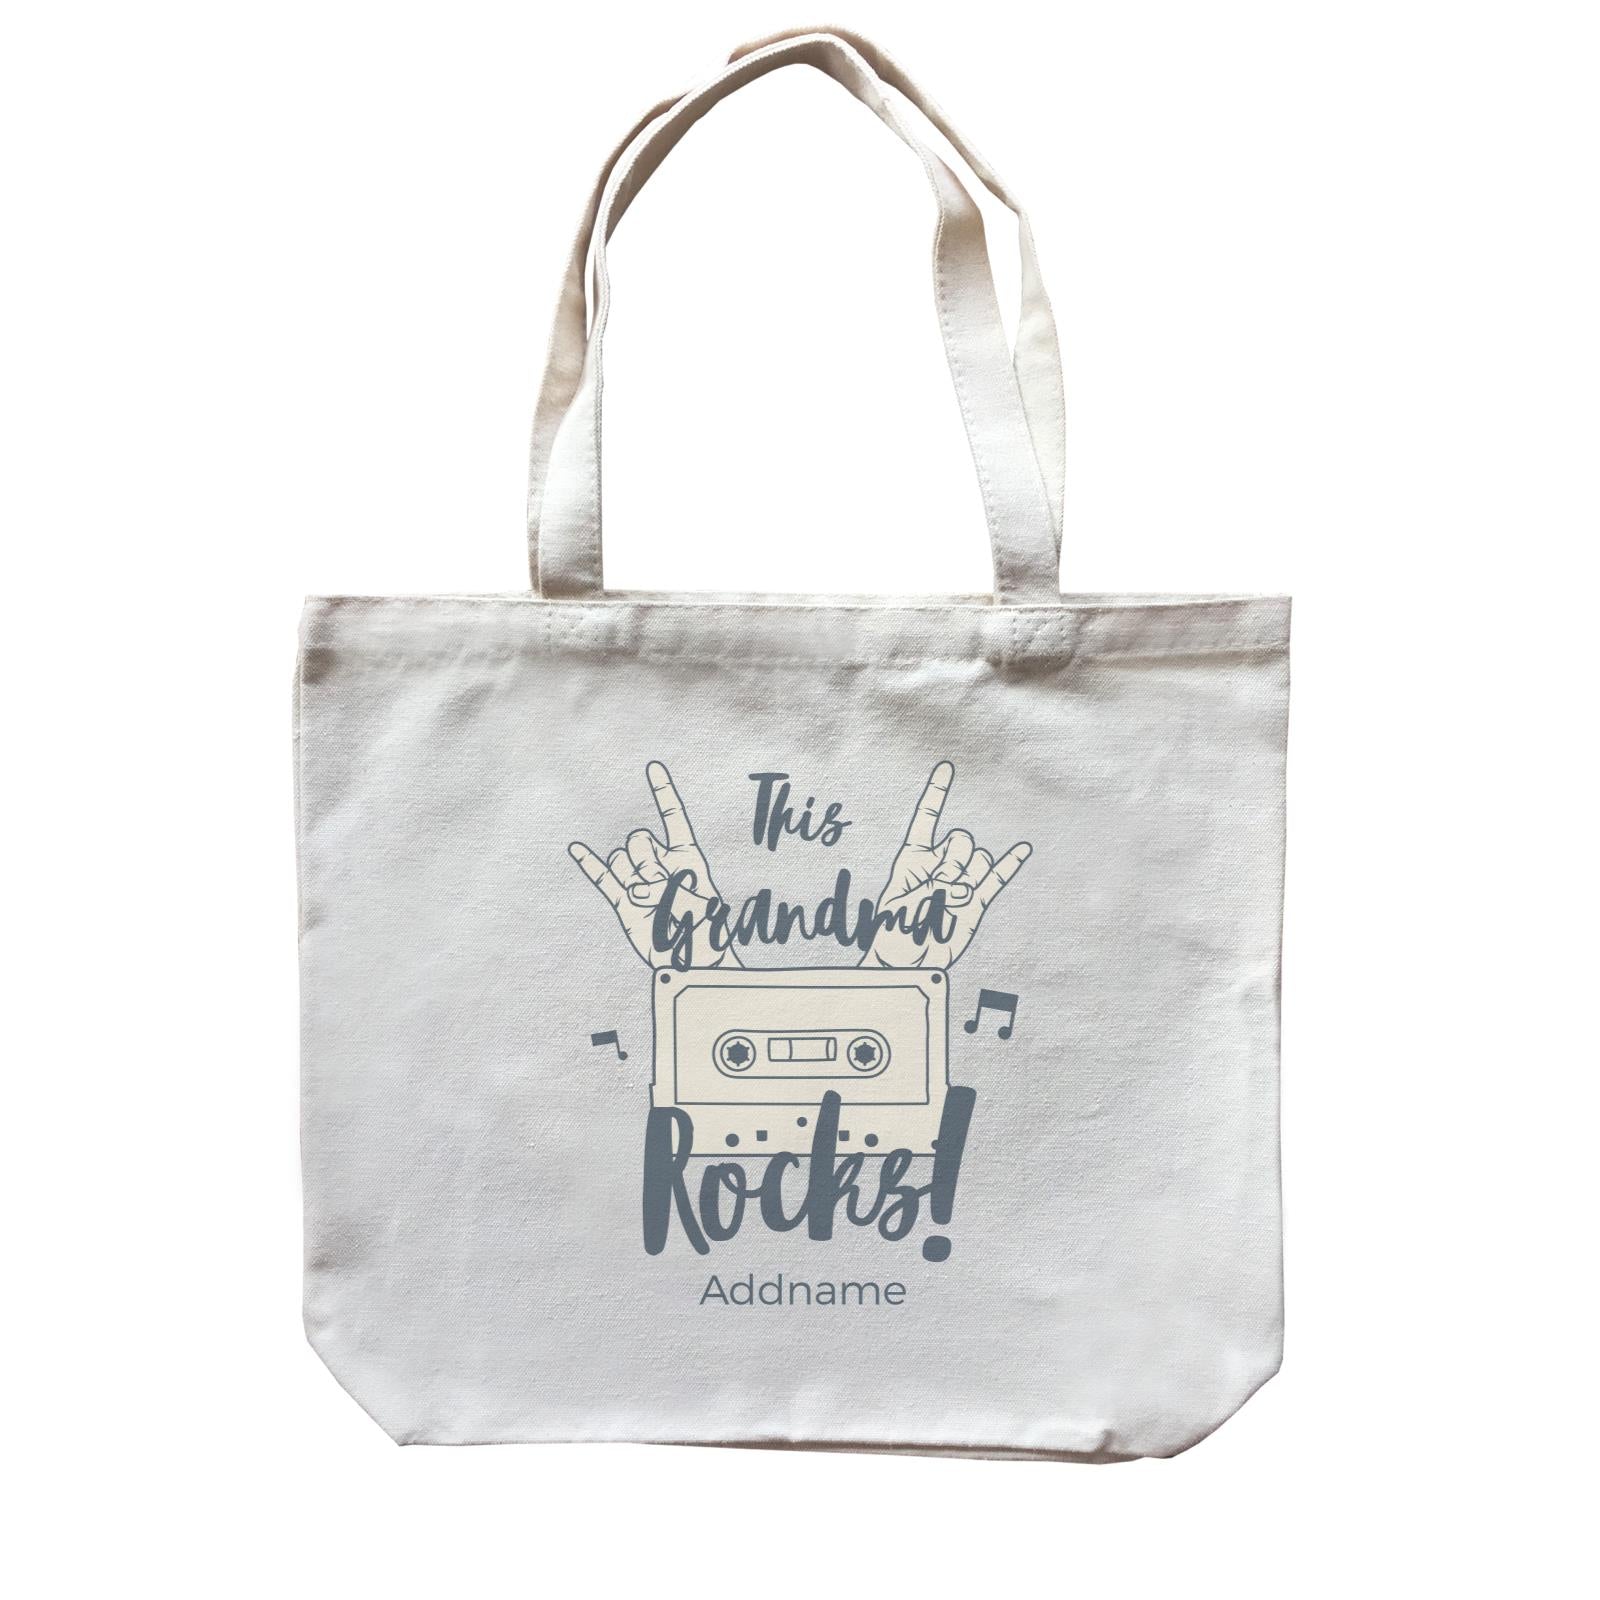 Awesome Mom 1 This Grandma Rocks! Cassette Addname Canvas Bag